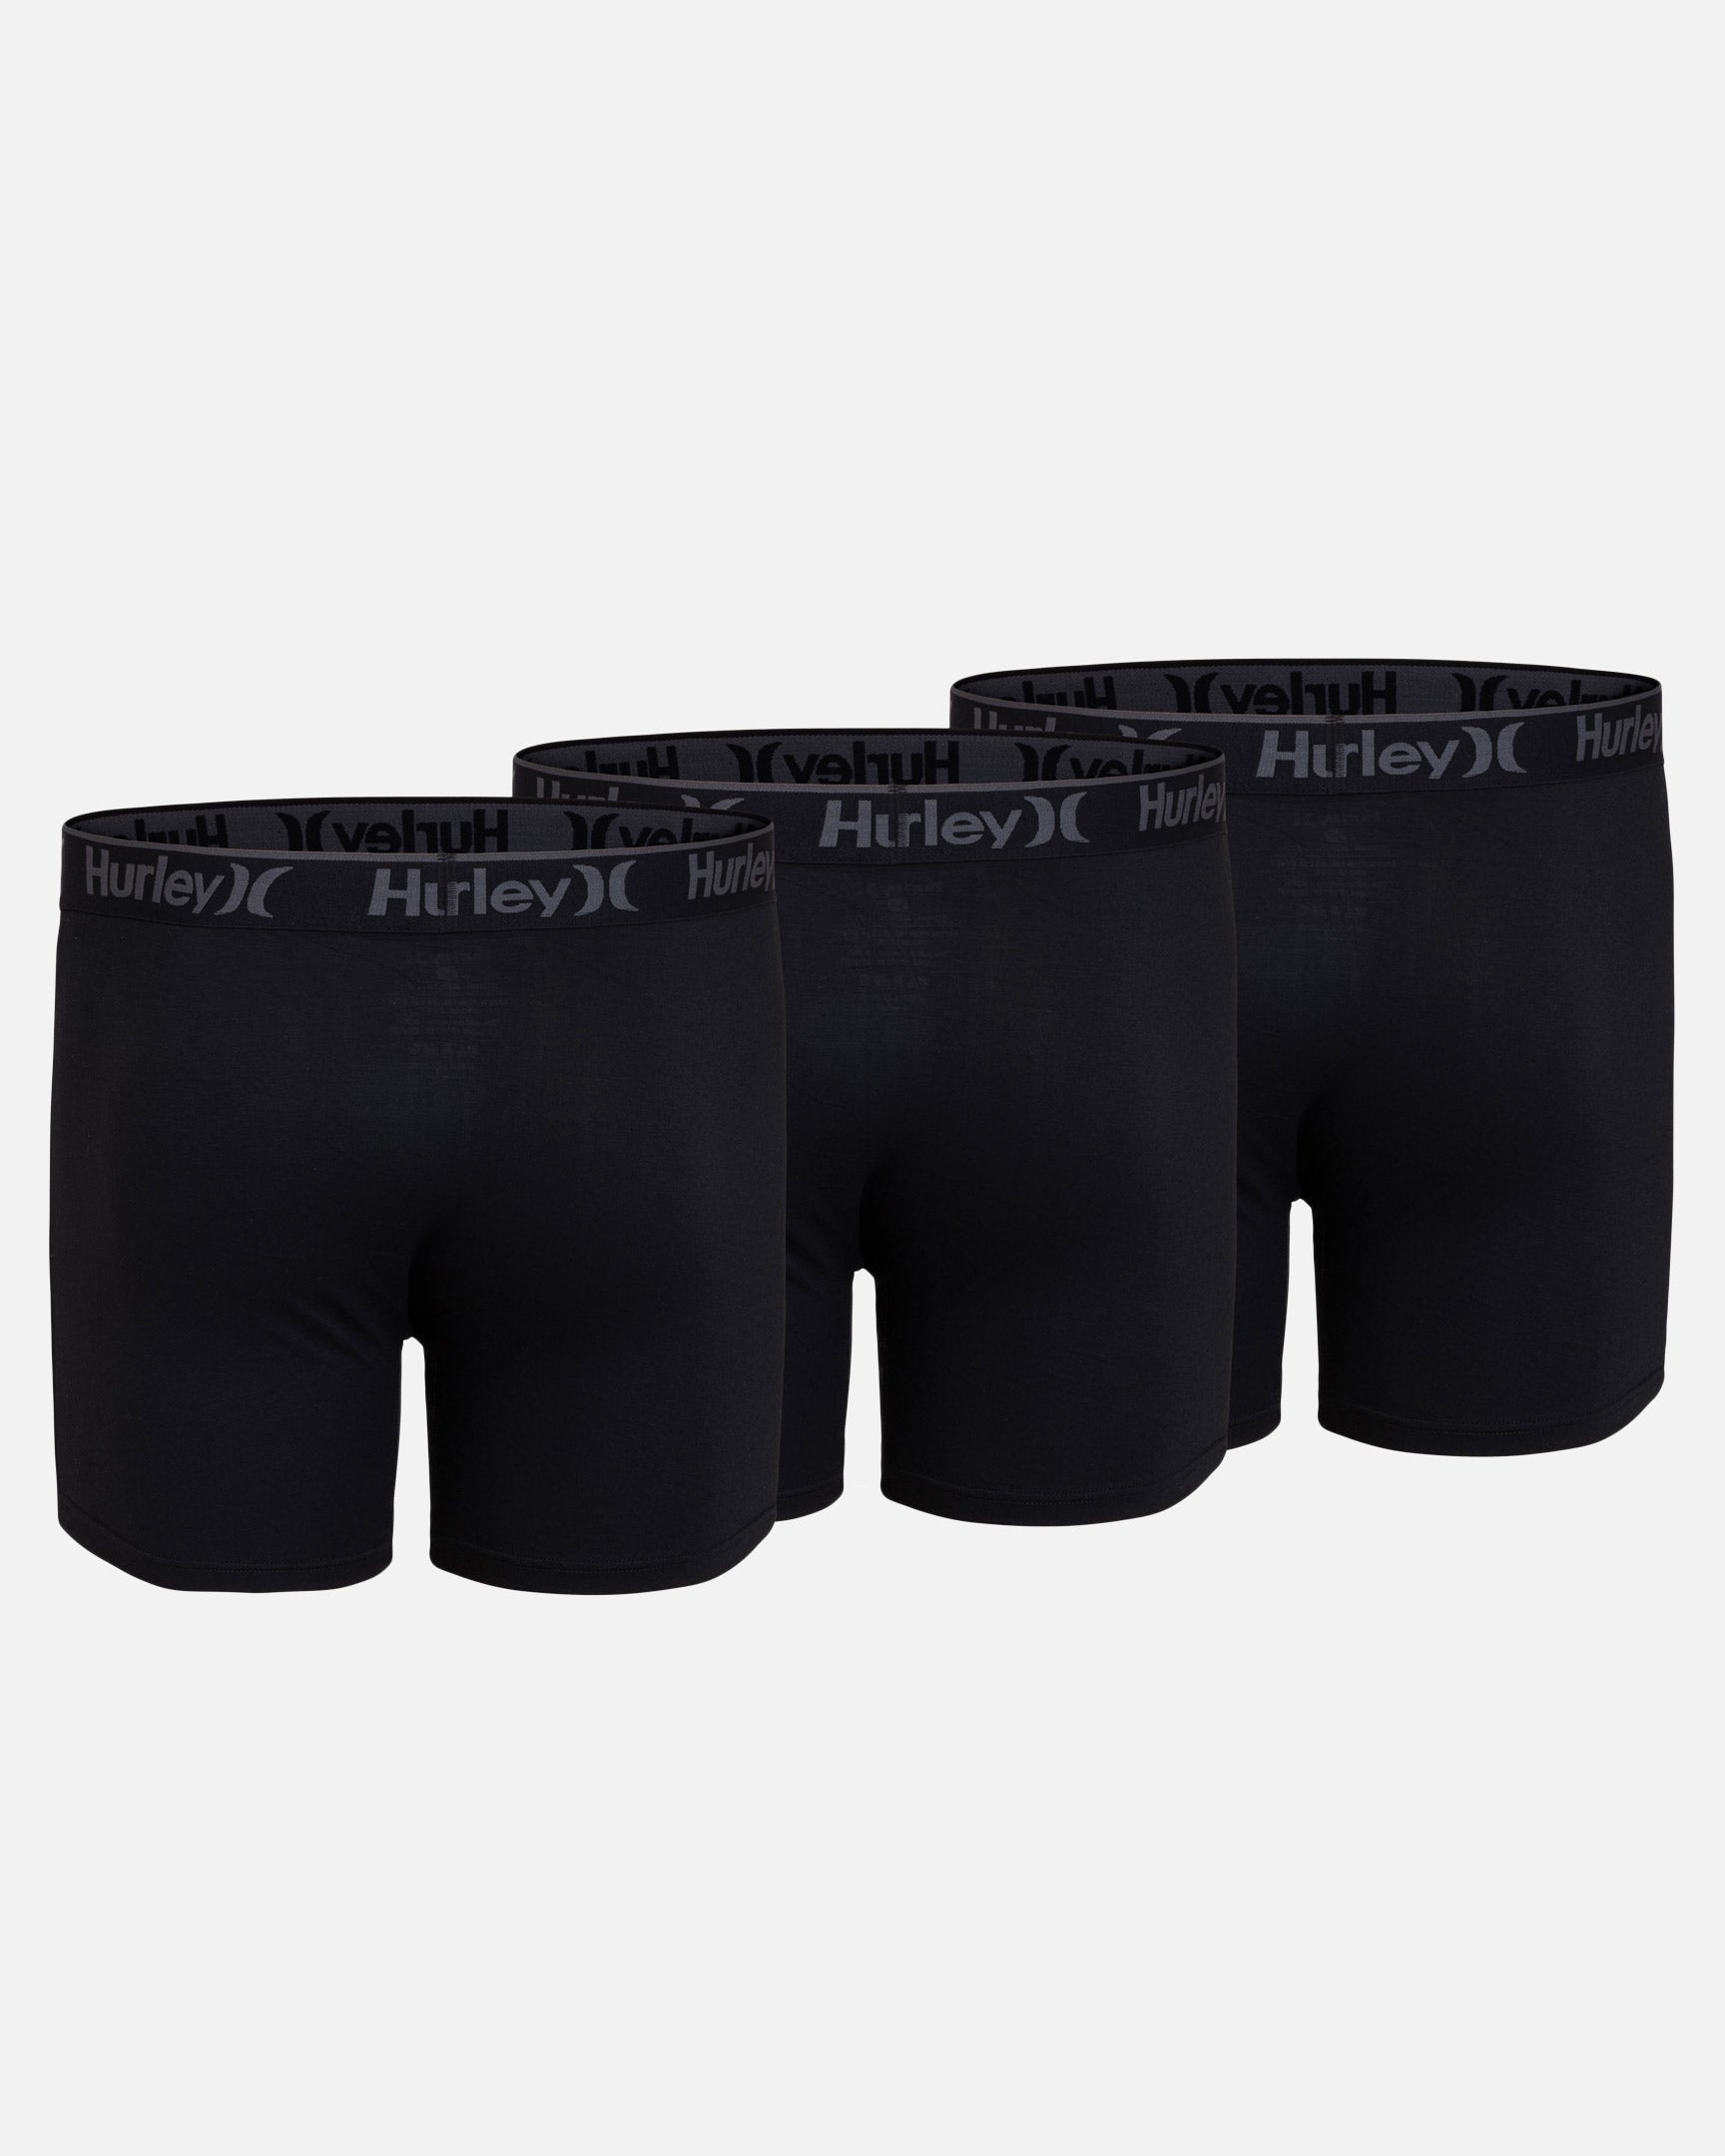 Hurley 2 Pack Everyday Stretch Boxer Briefs - Men's Boxers in Grey Heather  Black